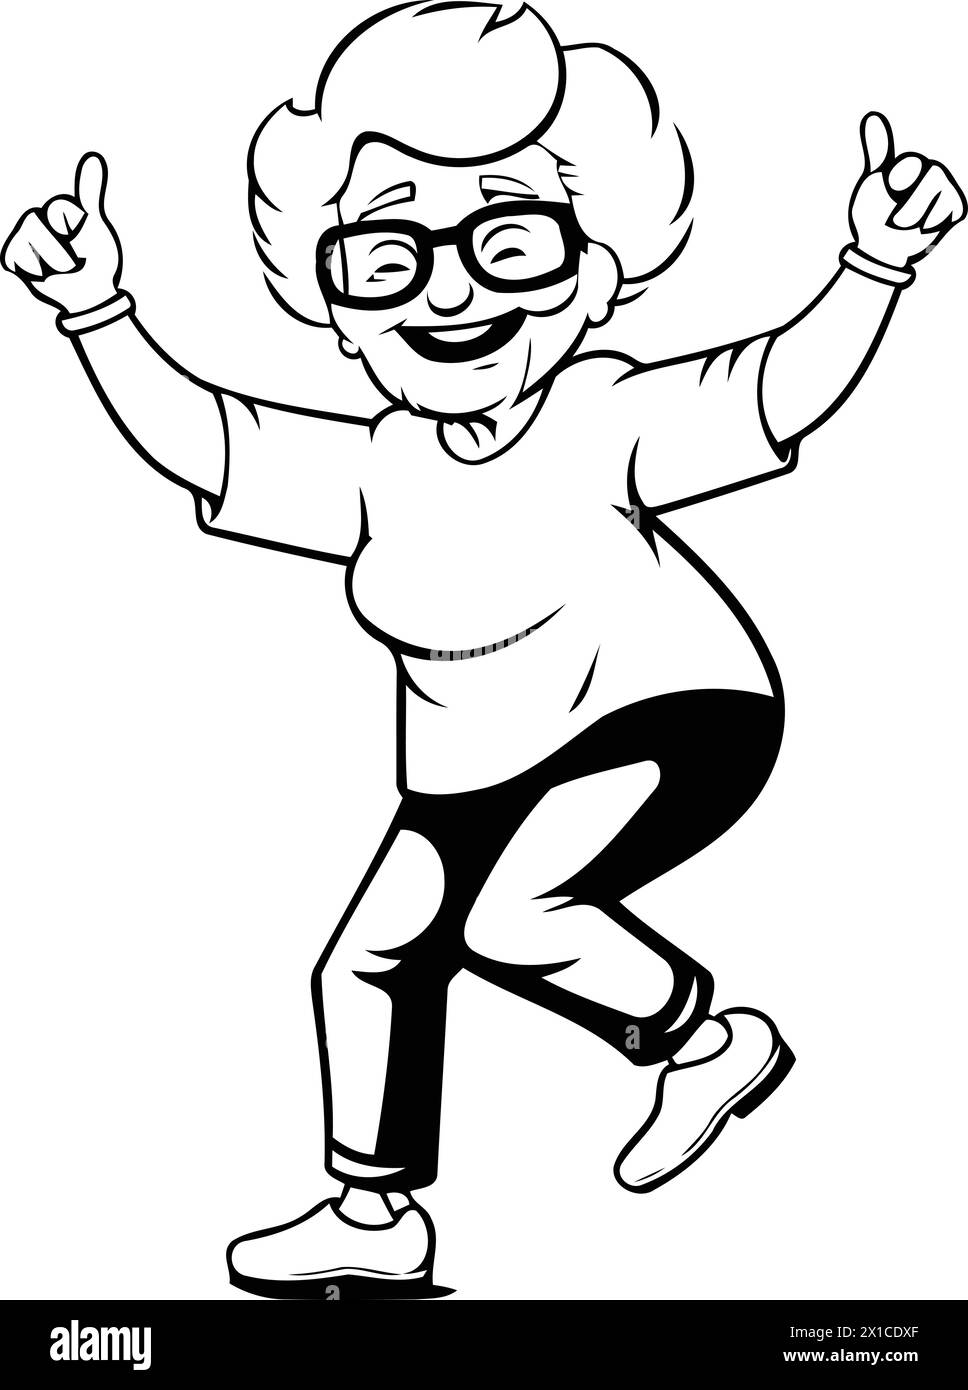 Elderly woman with glasses dancing and smiling. Vector illustration. Stock Vector